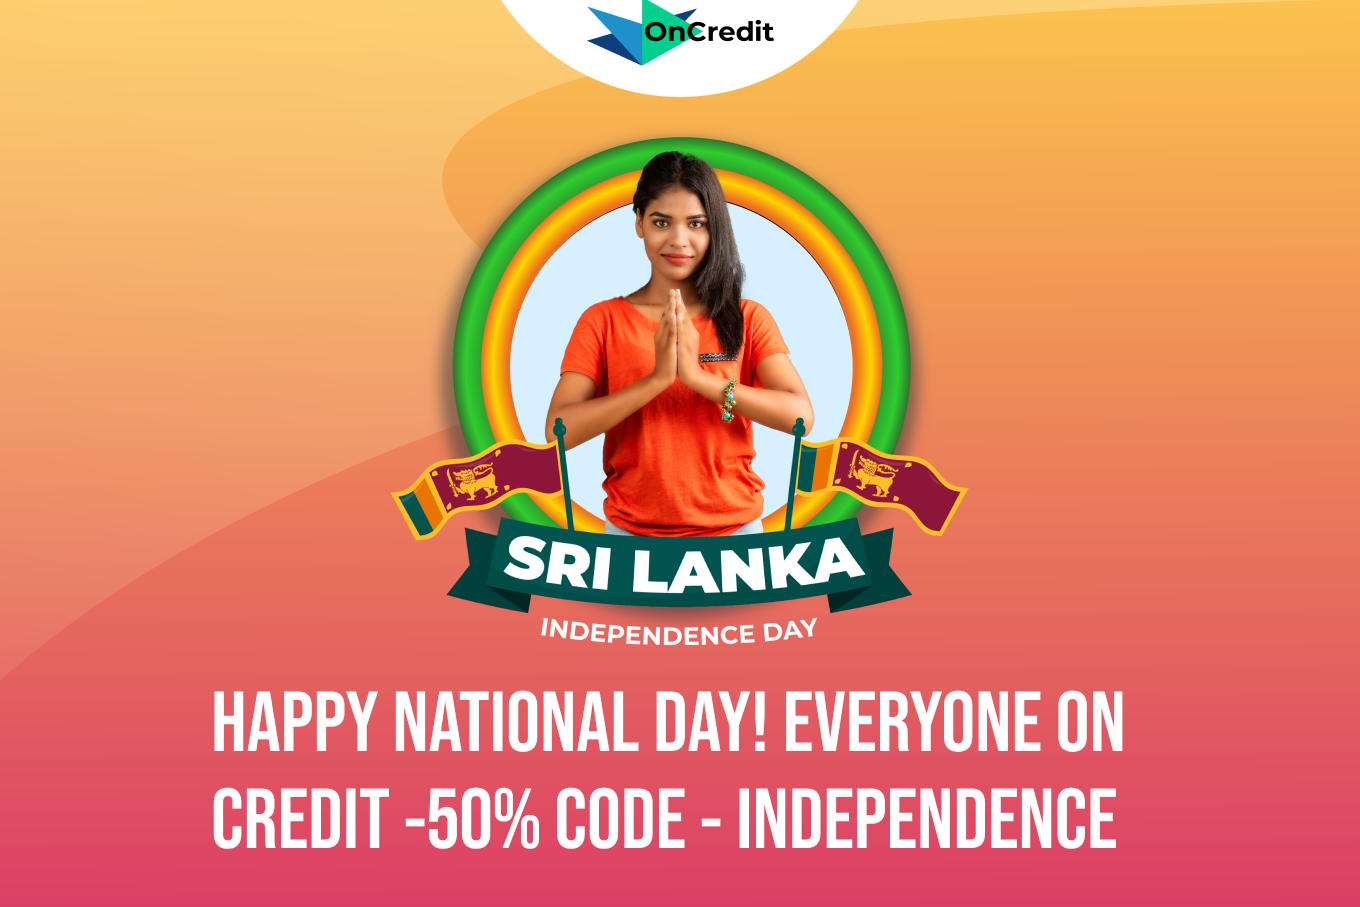 Happy Independence Day! Everyone -50%, code - Independence